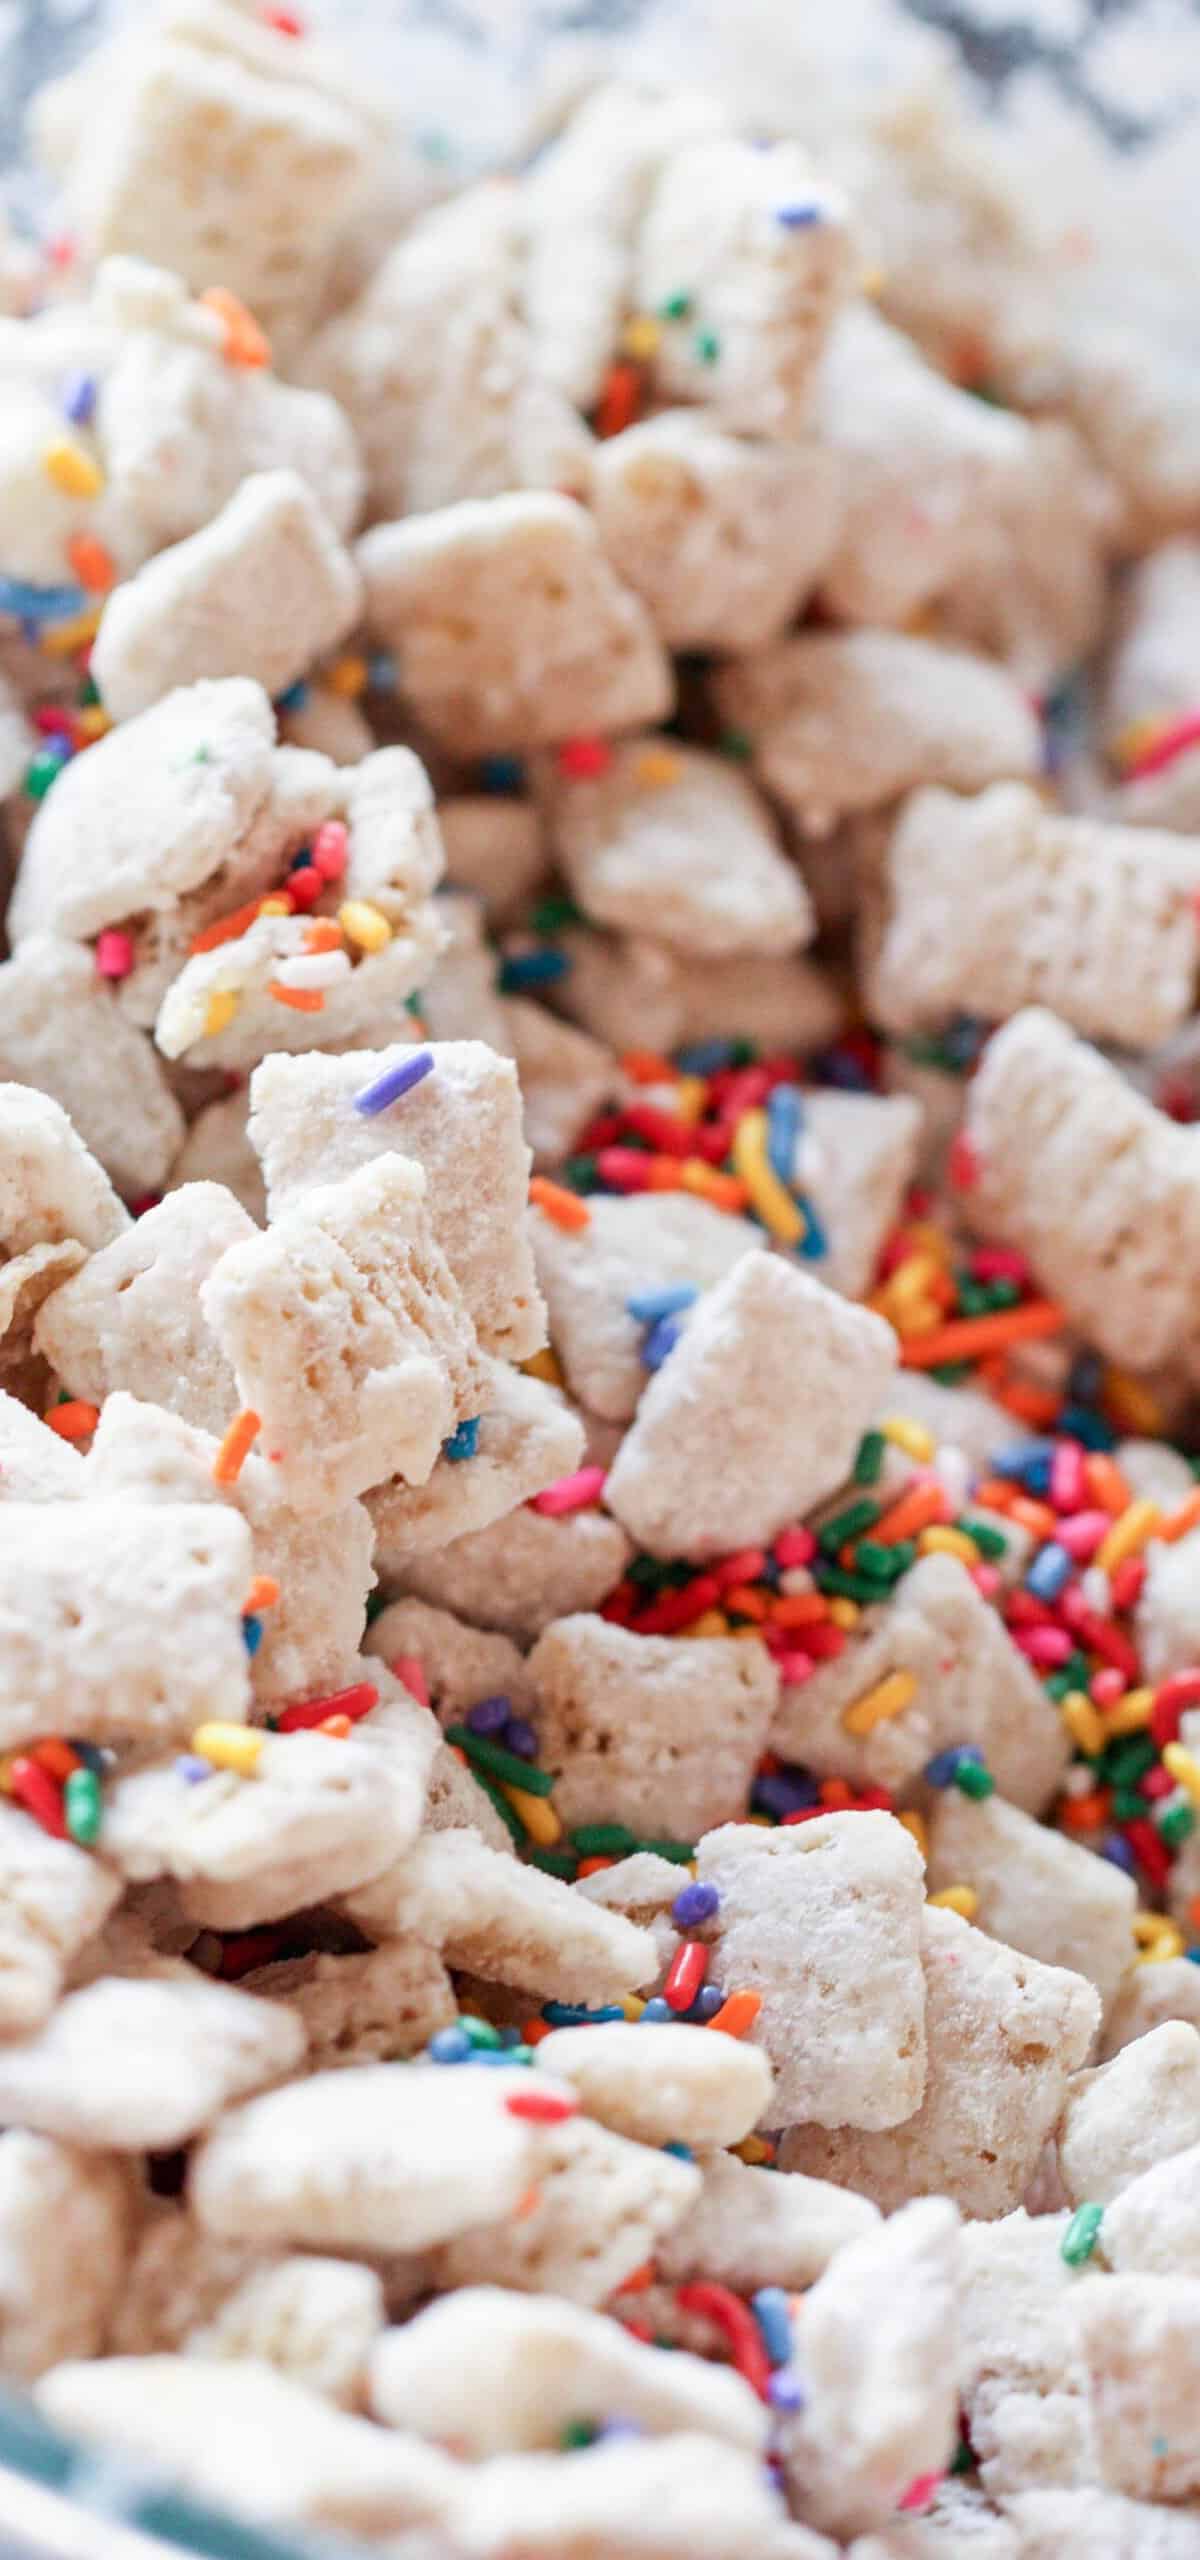  Crunchy, sweet, and loaded with sprinkles! What else could you ask for in a snack?